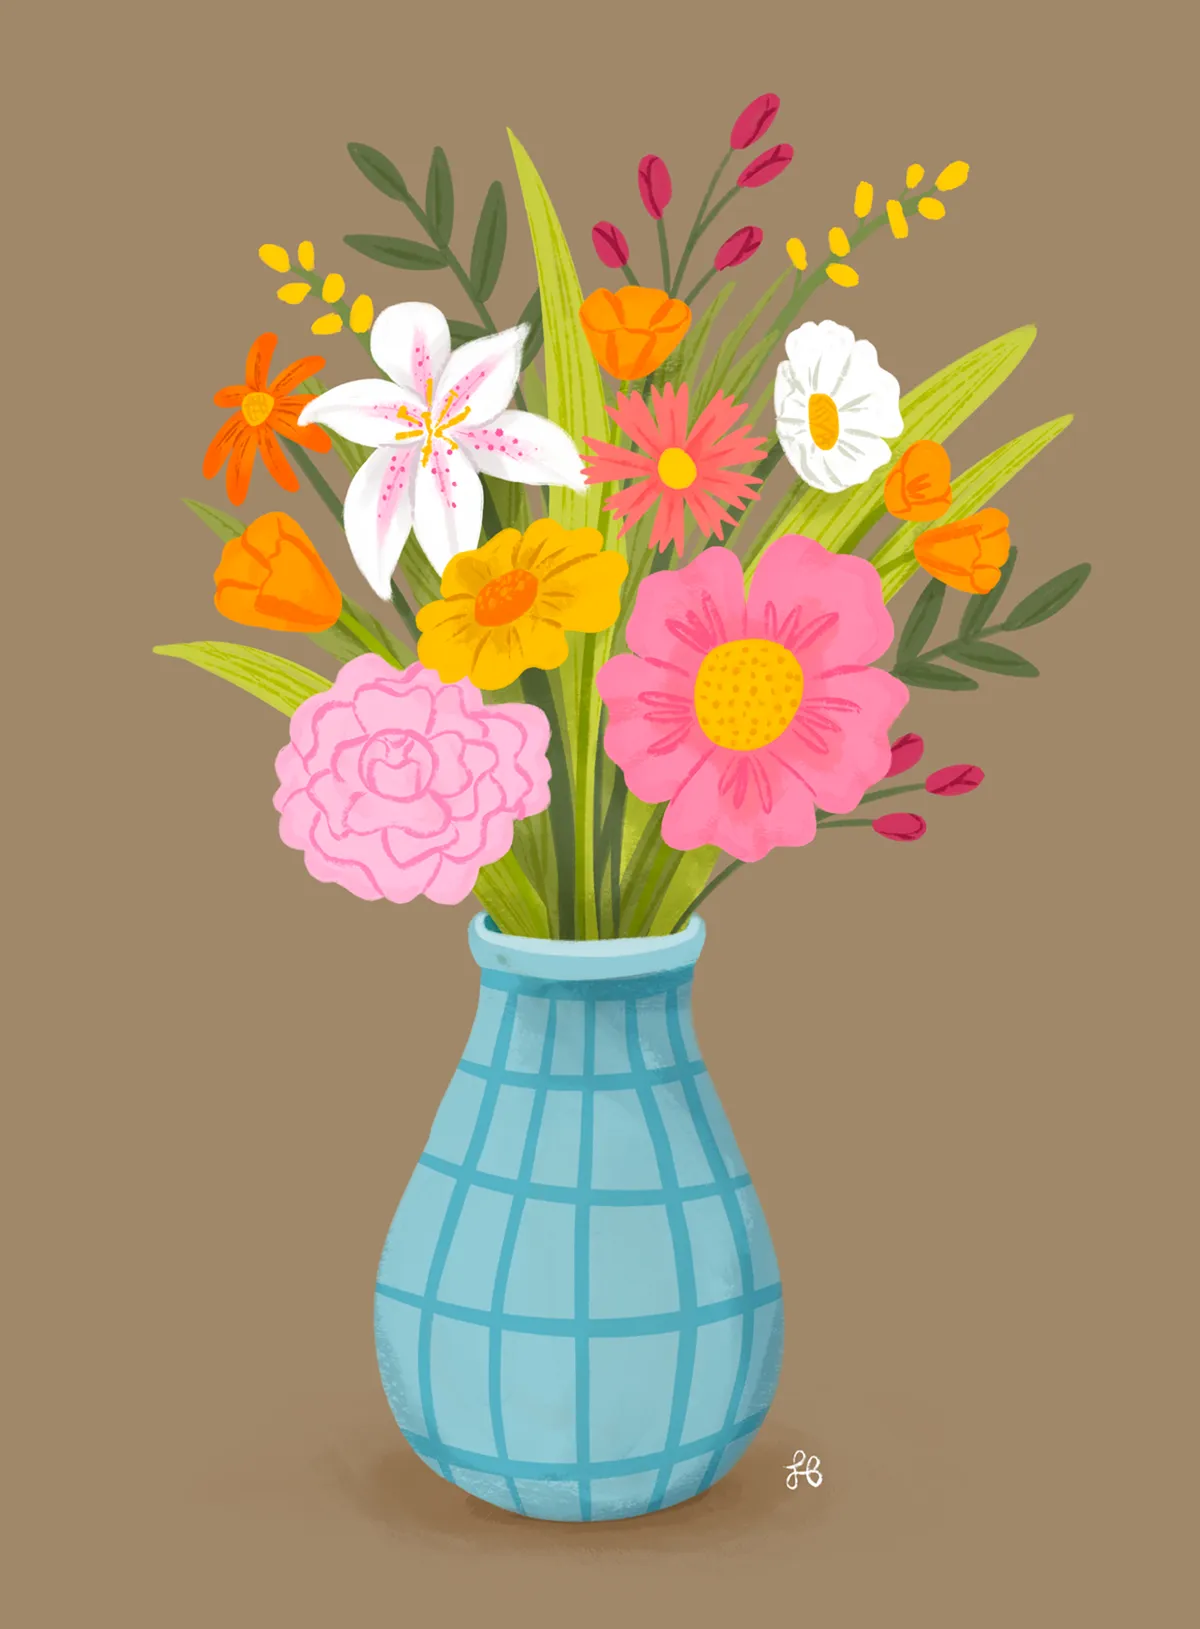 valentines drawing ideas - bouquet